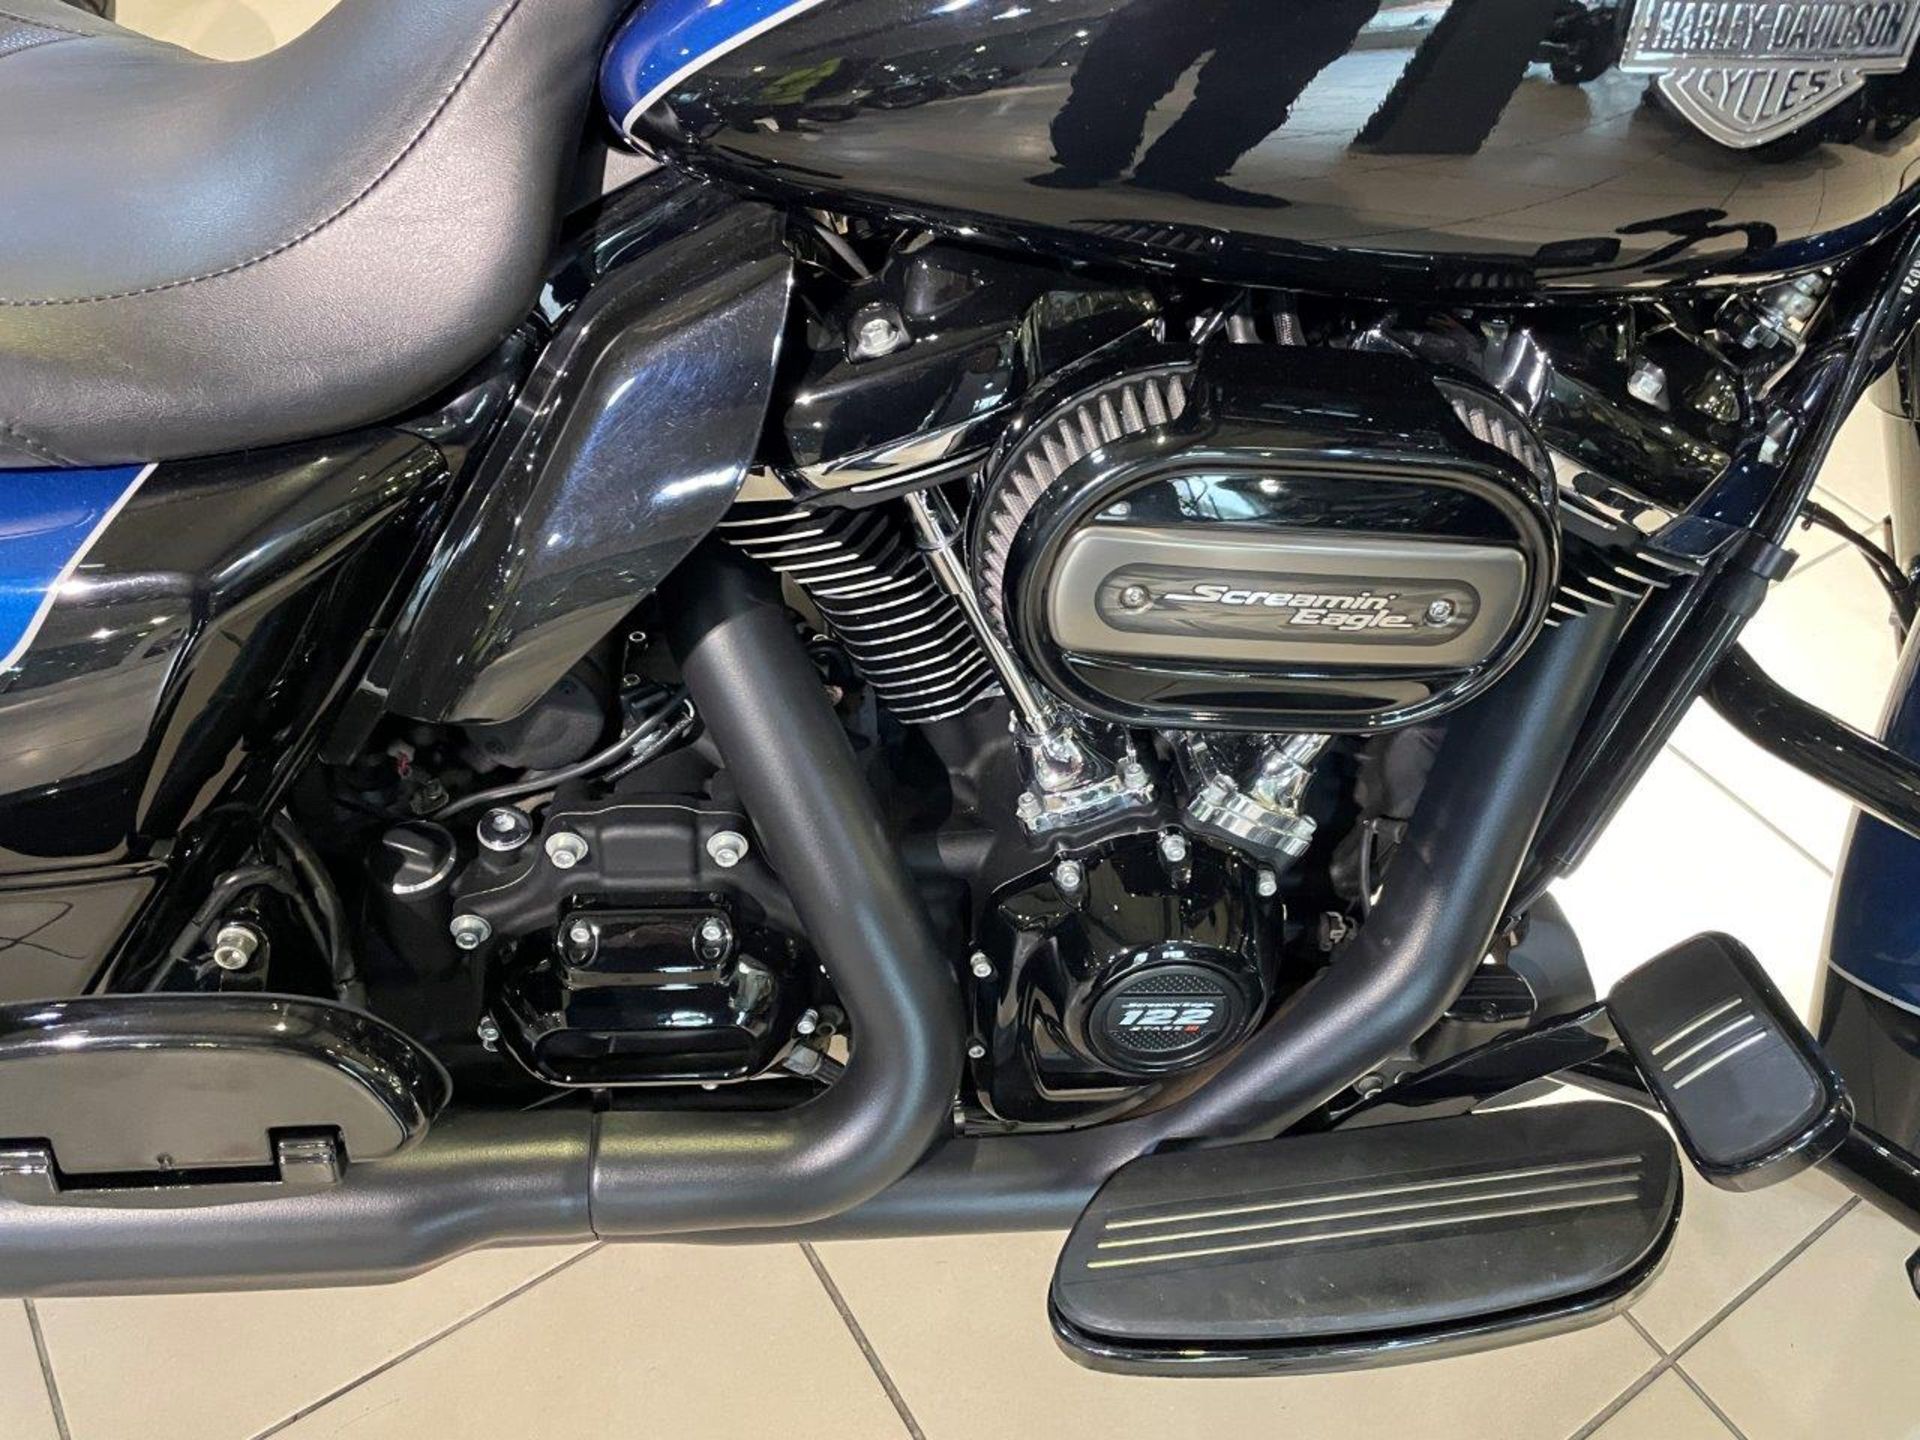 Harley Davidson FLTRXS Road Glide Special, with stage 3 upgrade Motorbike (May 2022) - Bild 11 aus 20